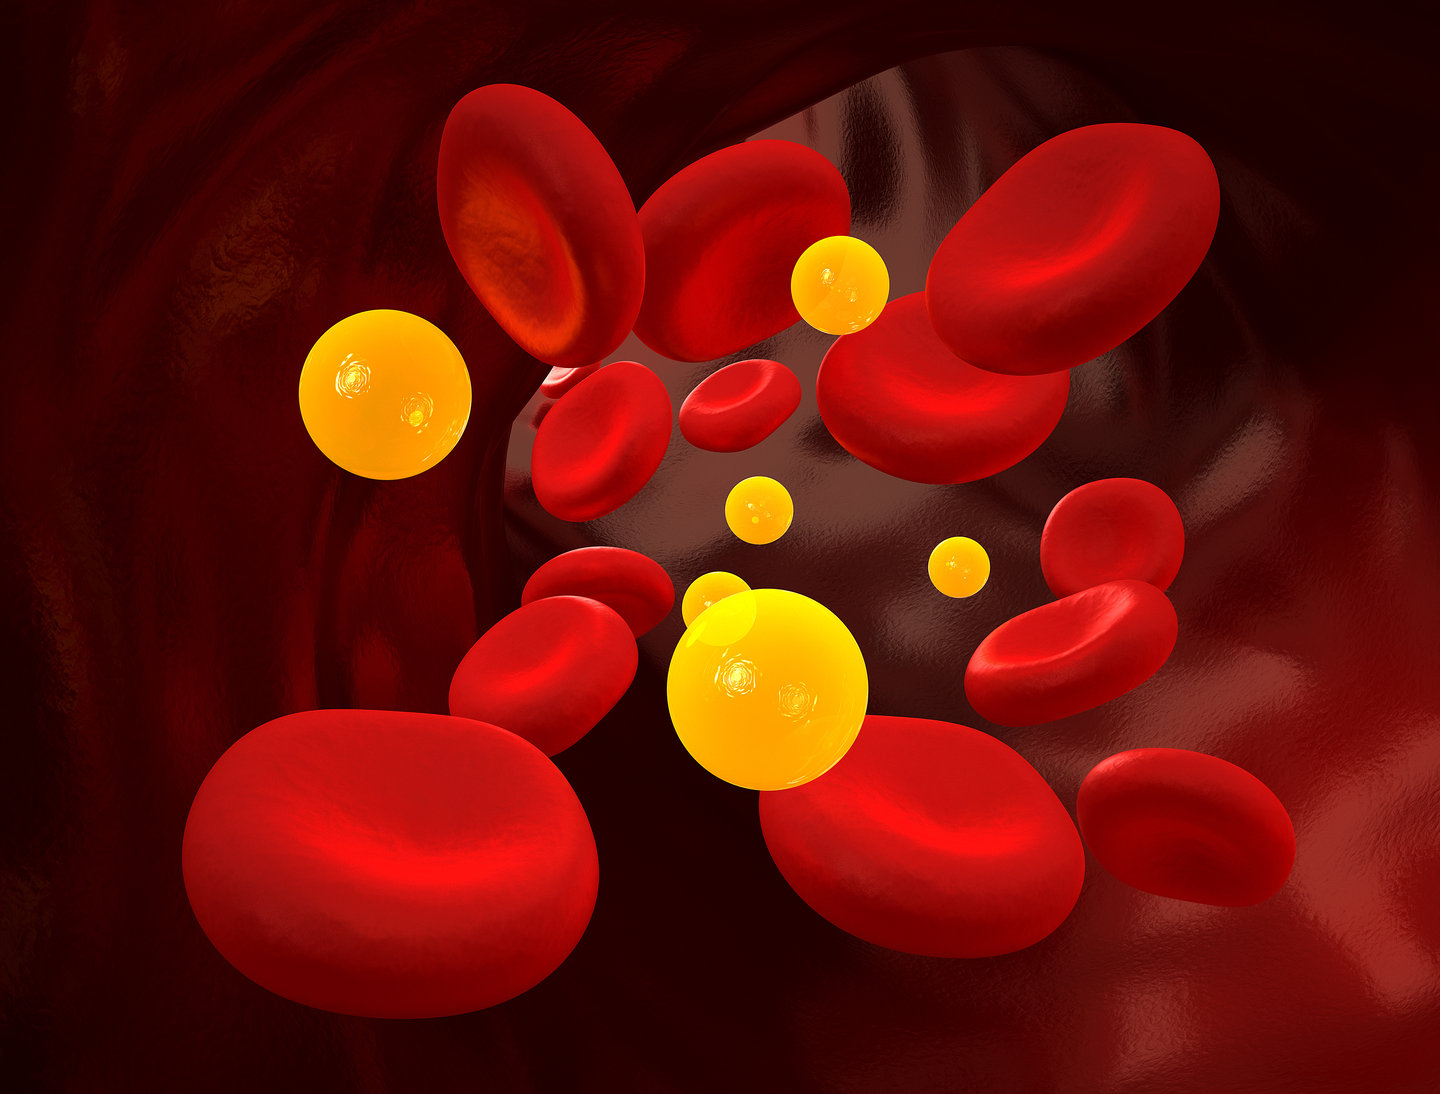 Inclisiran Found to Be Well-tolerated and Effective for Hyperlipidemia in Adults